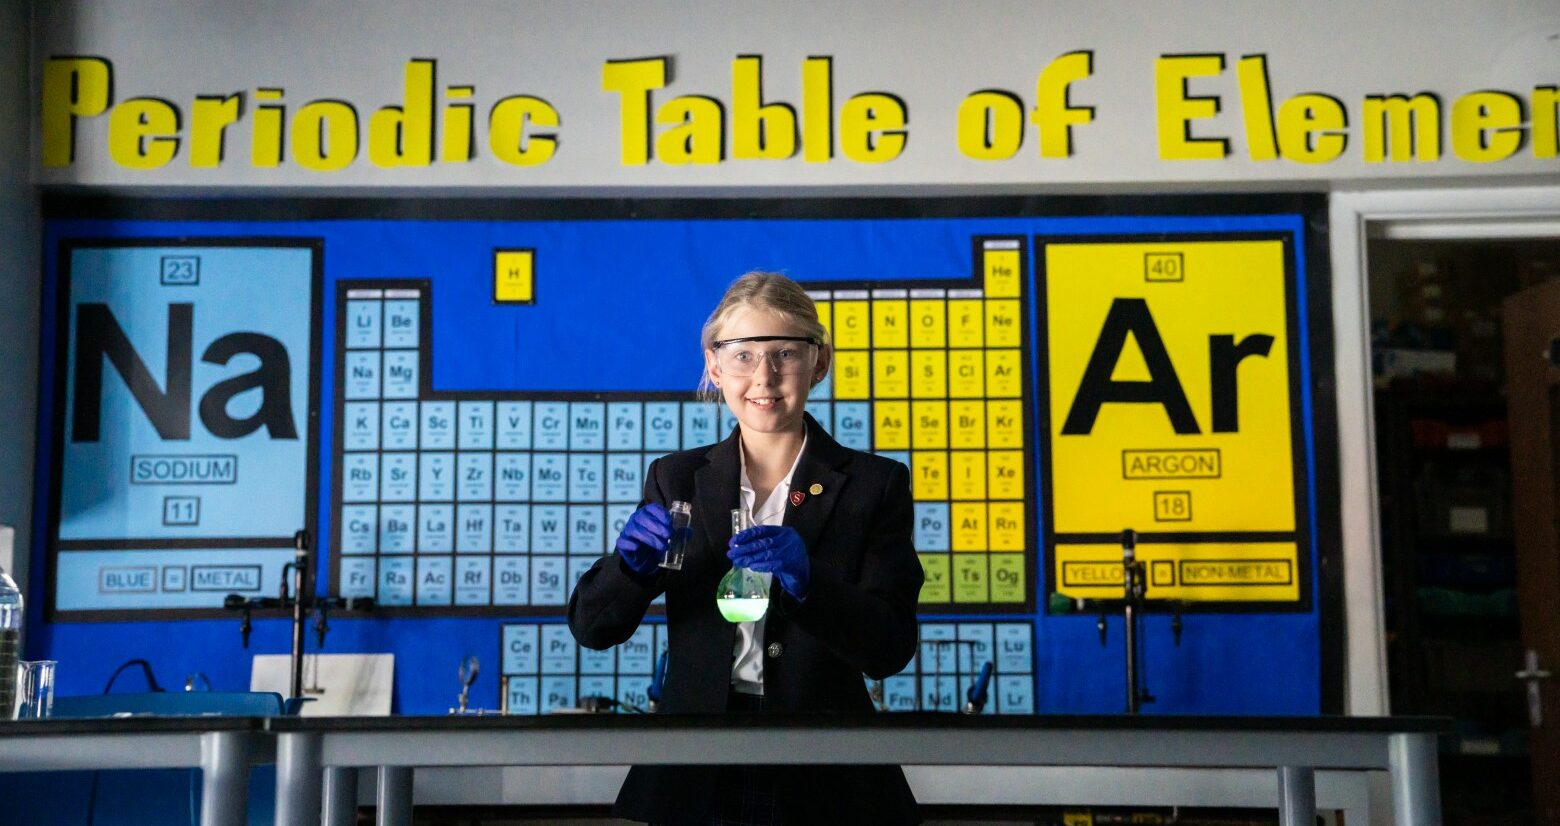 Senior school pupil in a science lab at St Mary's school conducting an experiment while standing in front of of a periodic table